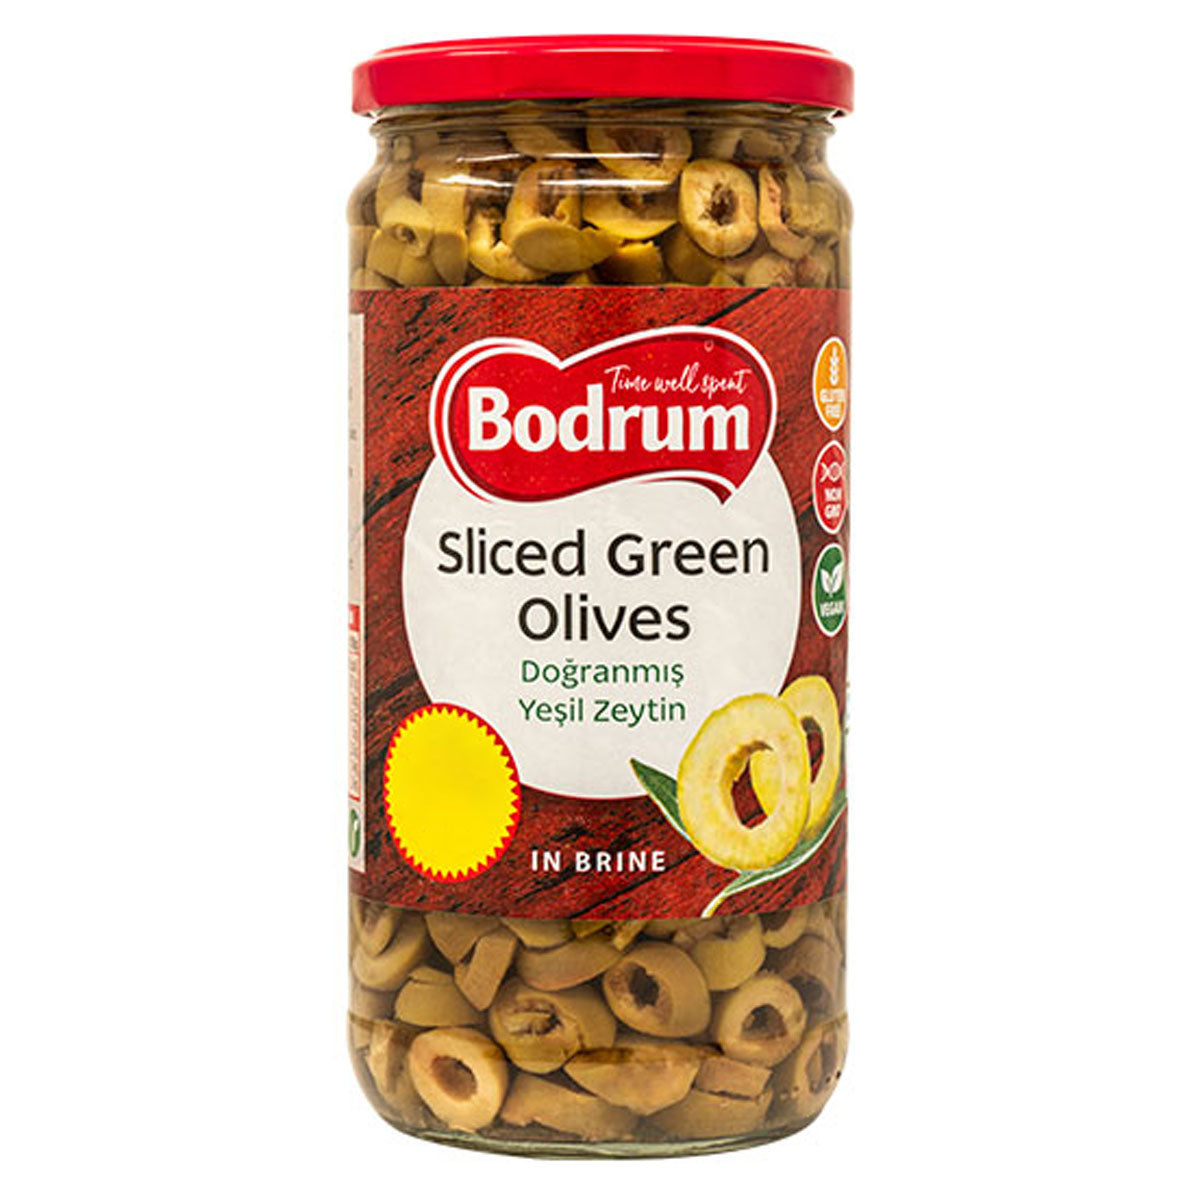 A jar of Bodrum - Sliced Green Olives - 720g on a white background.